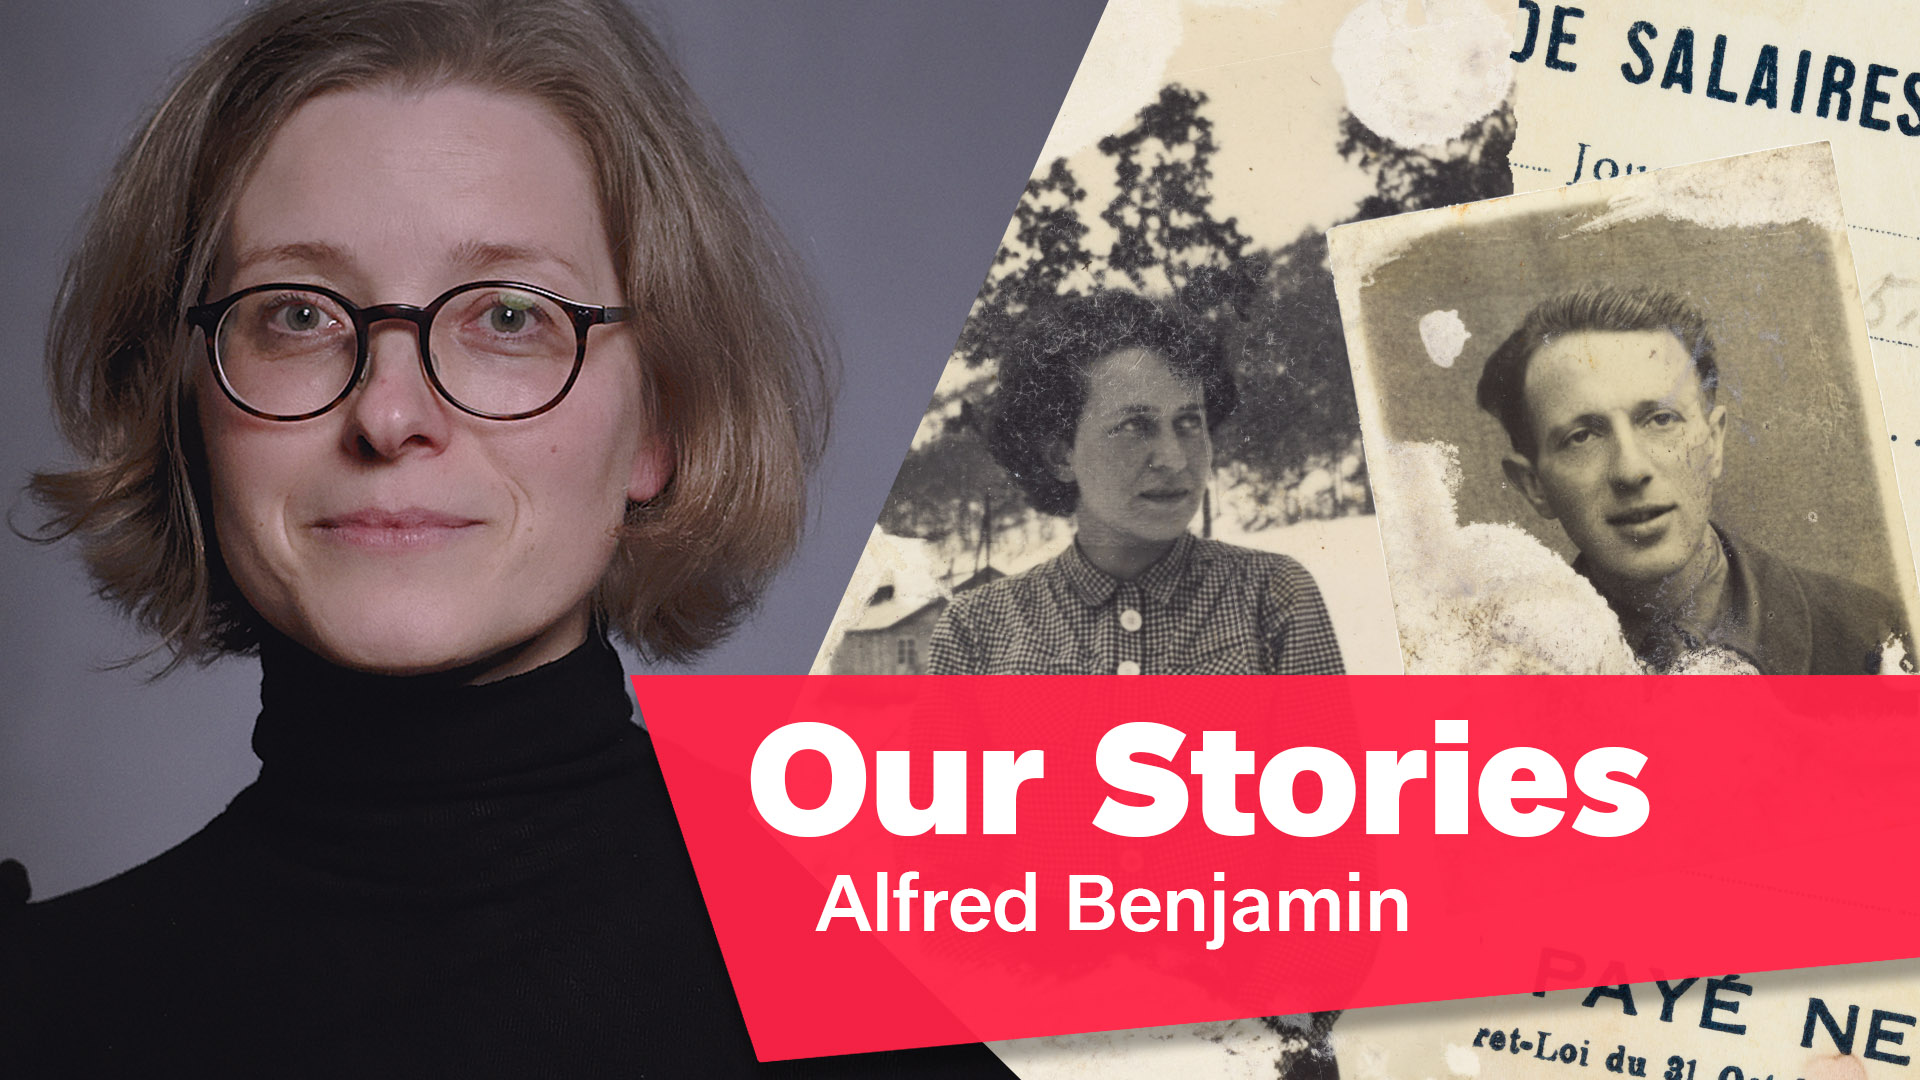 Portrait photo of Ulrike Neuwirth, next to it old black and white photos of a man and a woman, in the lower right corner of the picture the writing “Our Stories: Alfred Benjamin”.